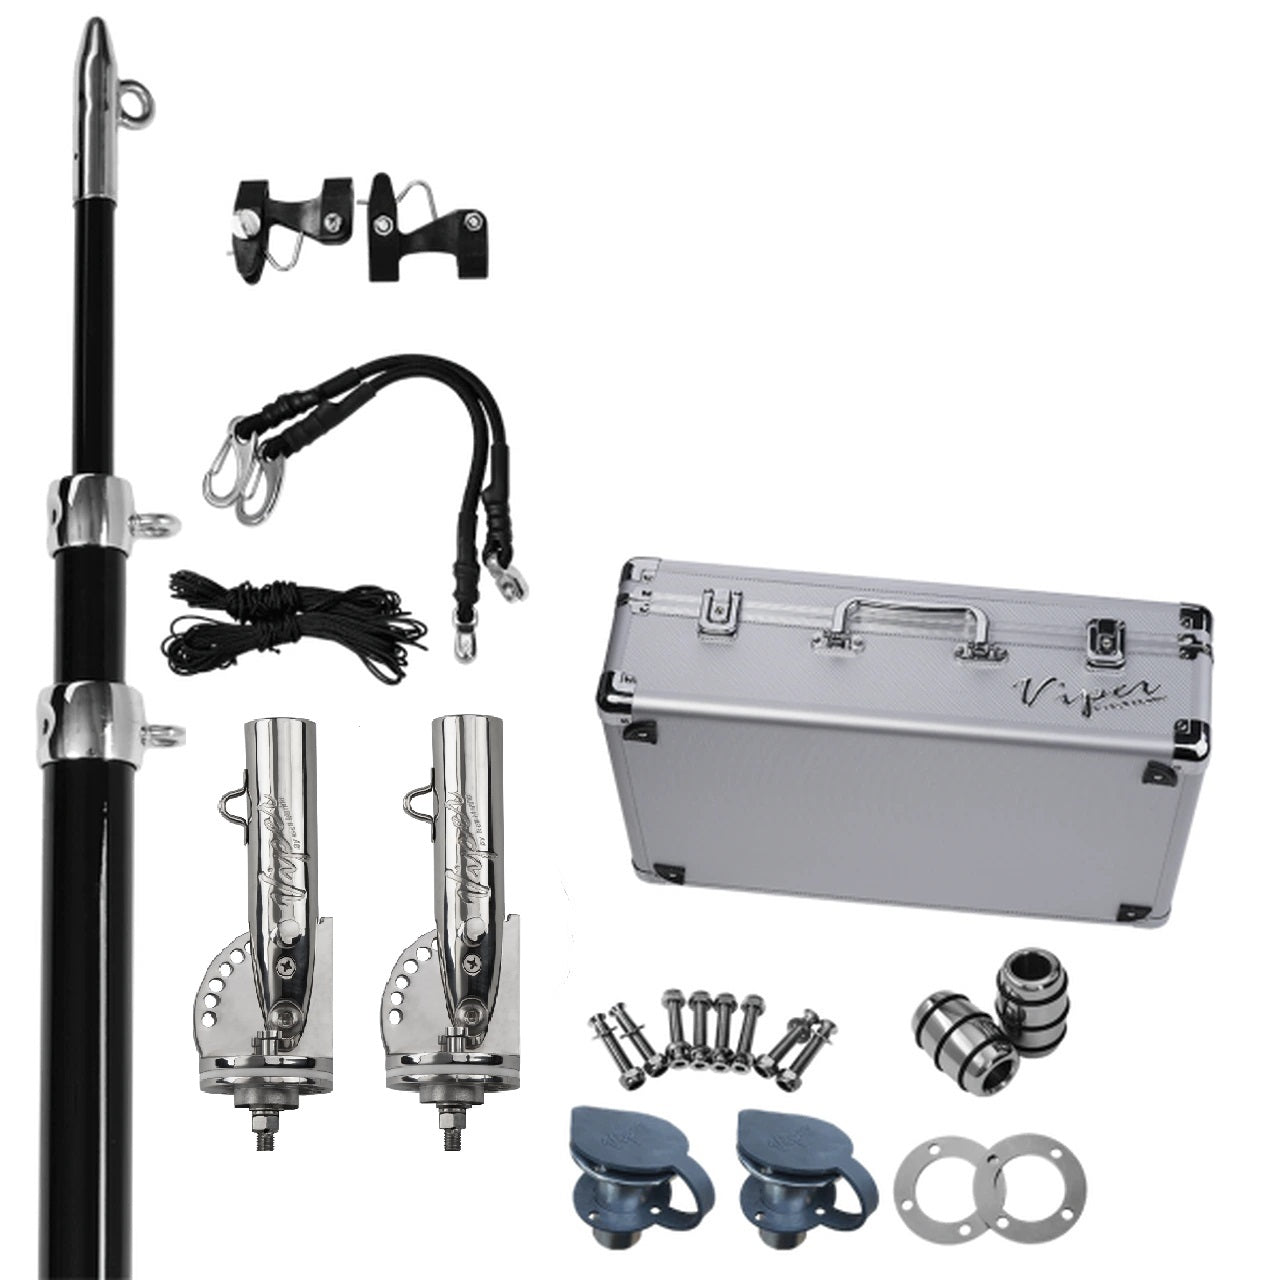 Viper Xtreme Side Mount Telescopic Outrigger Bundle